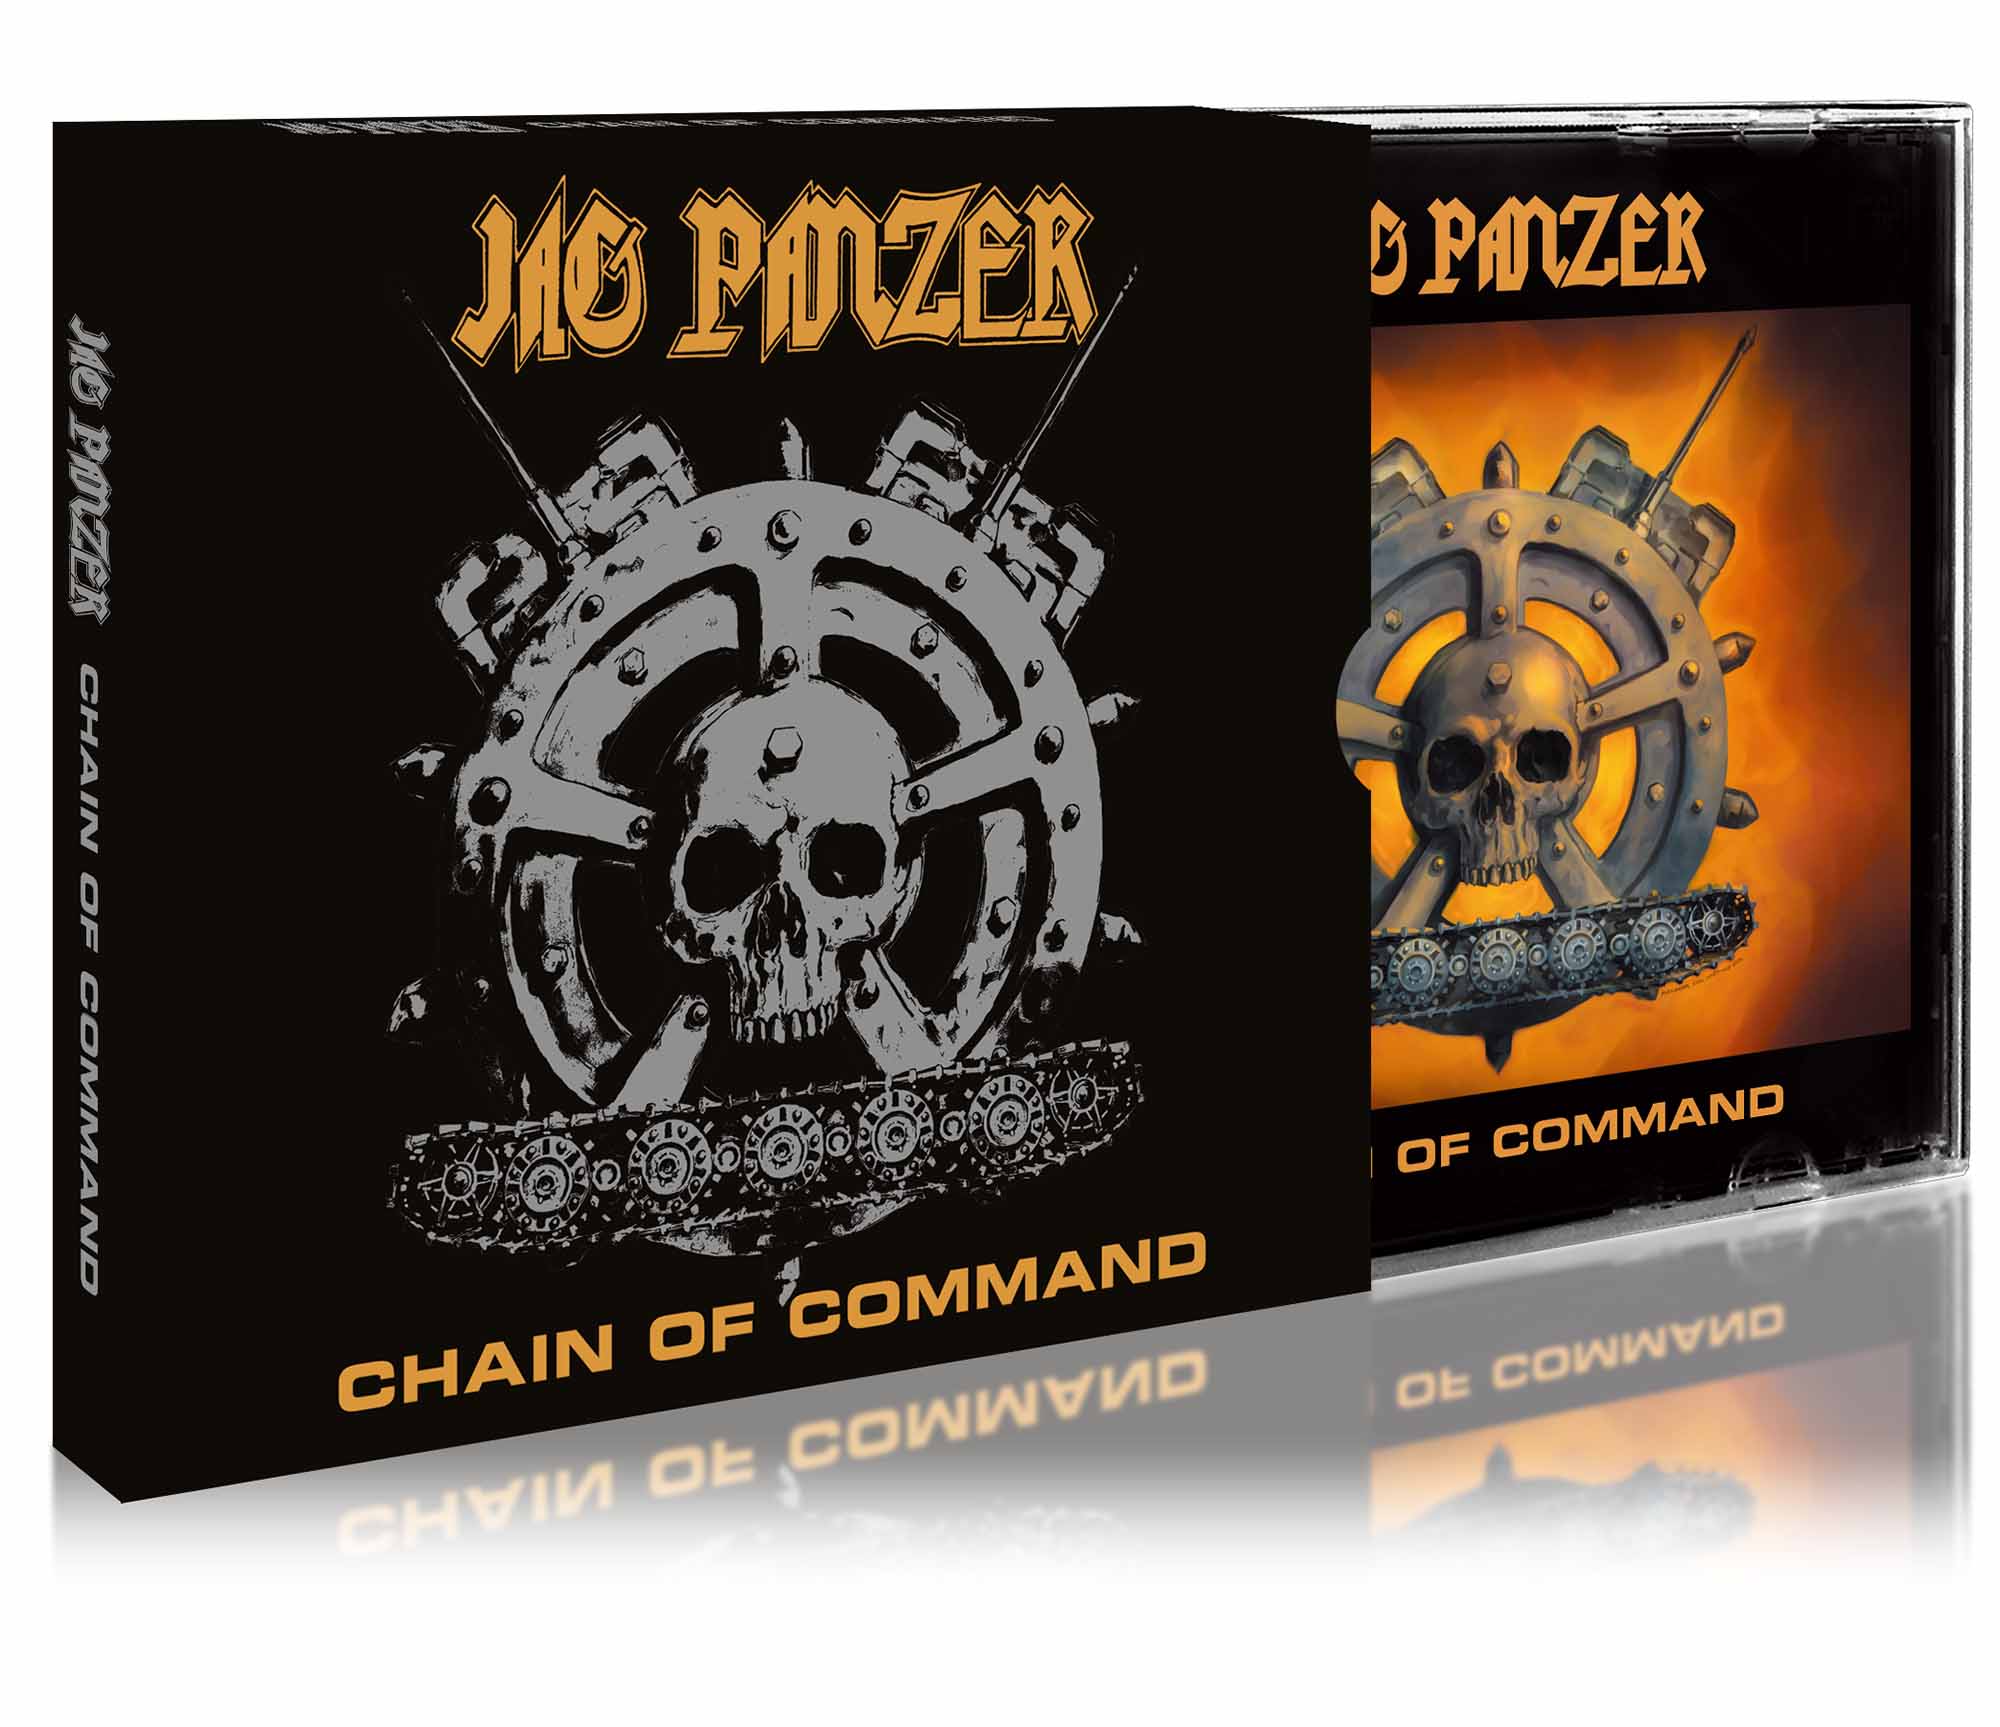 JAG PANZER - Chain of Command  CD